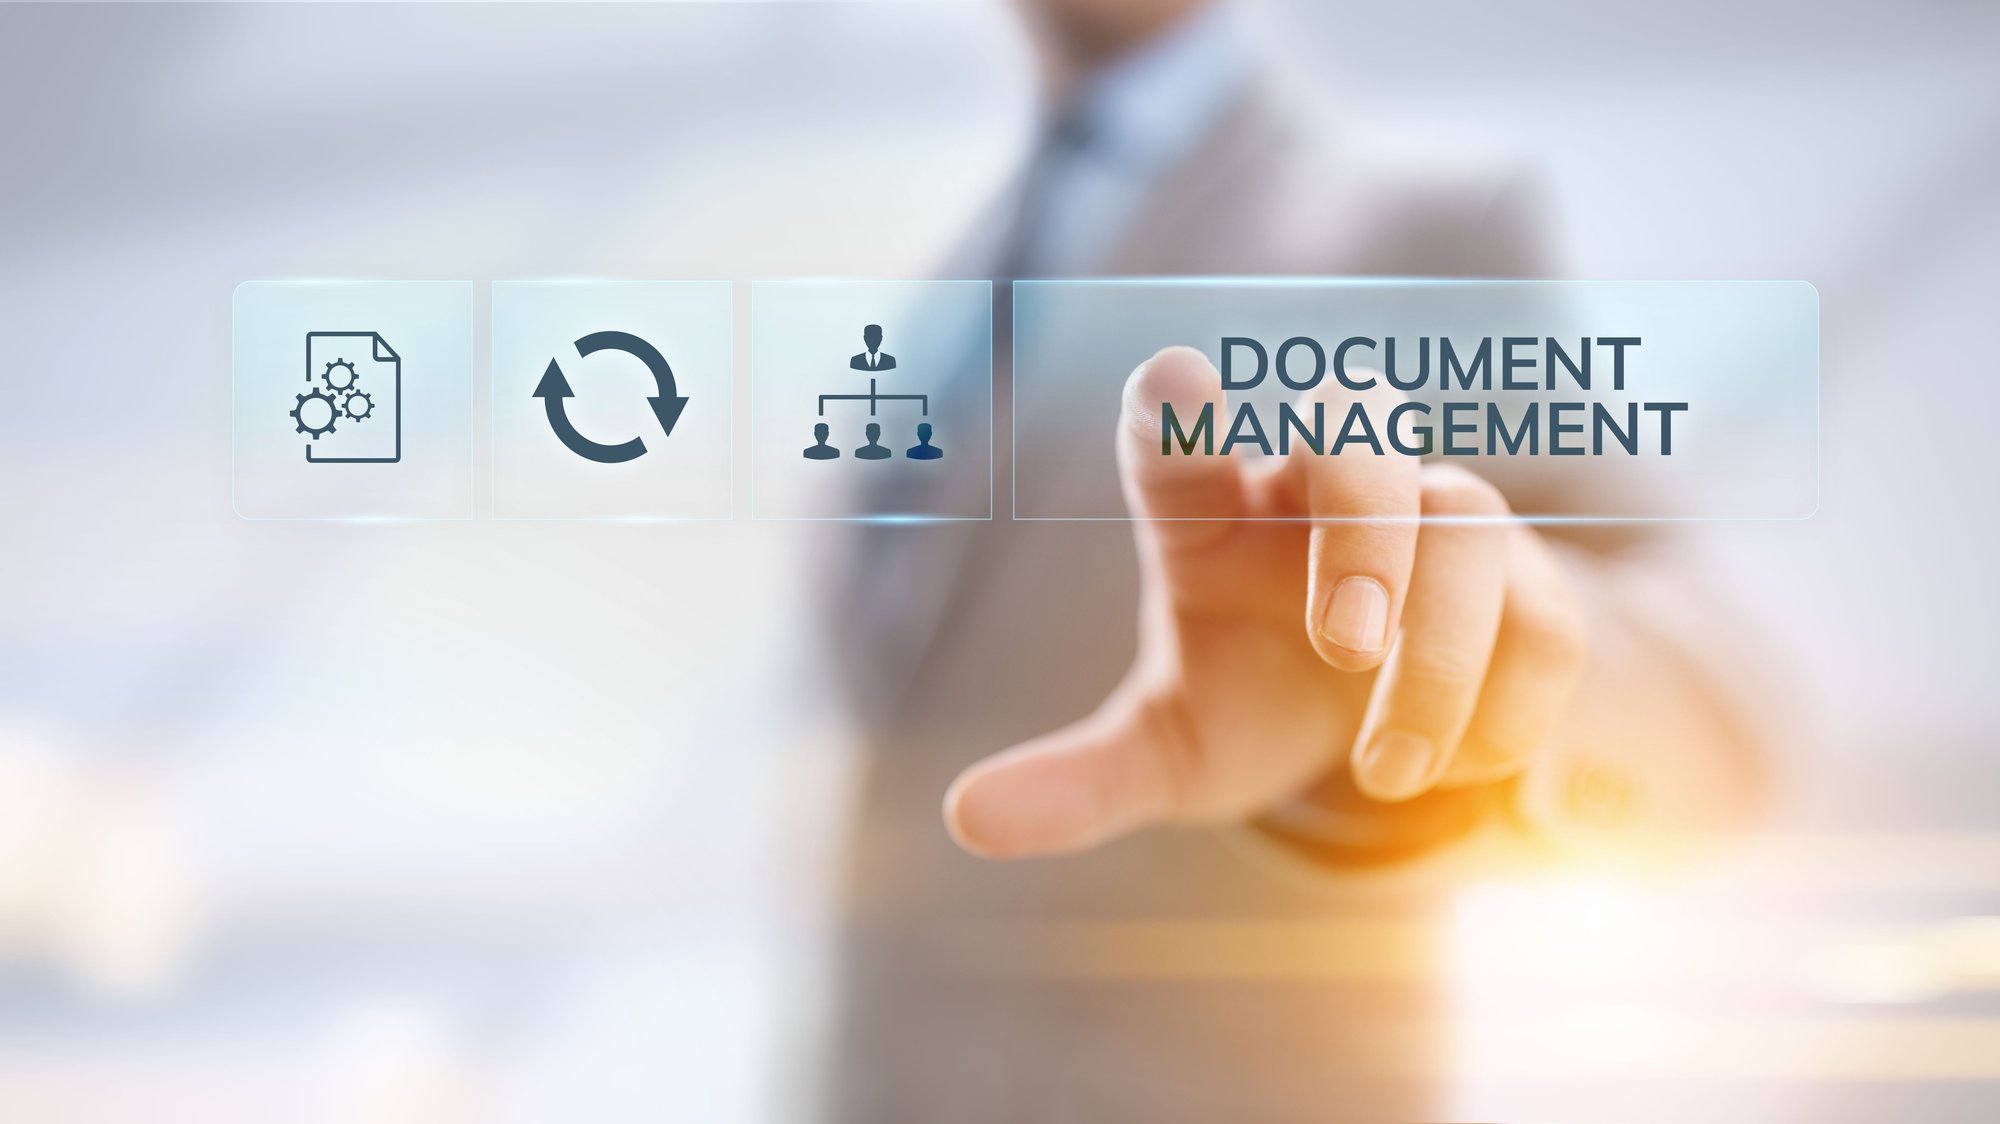 Tackle Content Sprawl: 5 Reasons Why Cloud Document Management Makes Sense